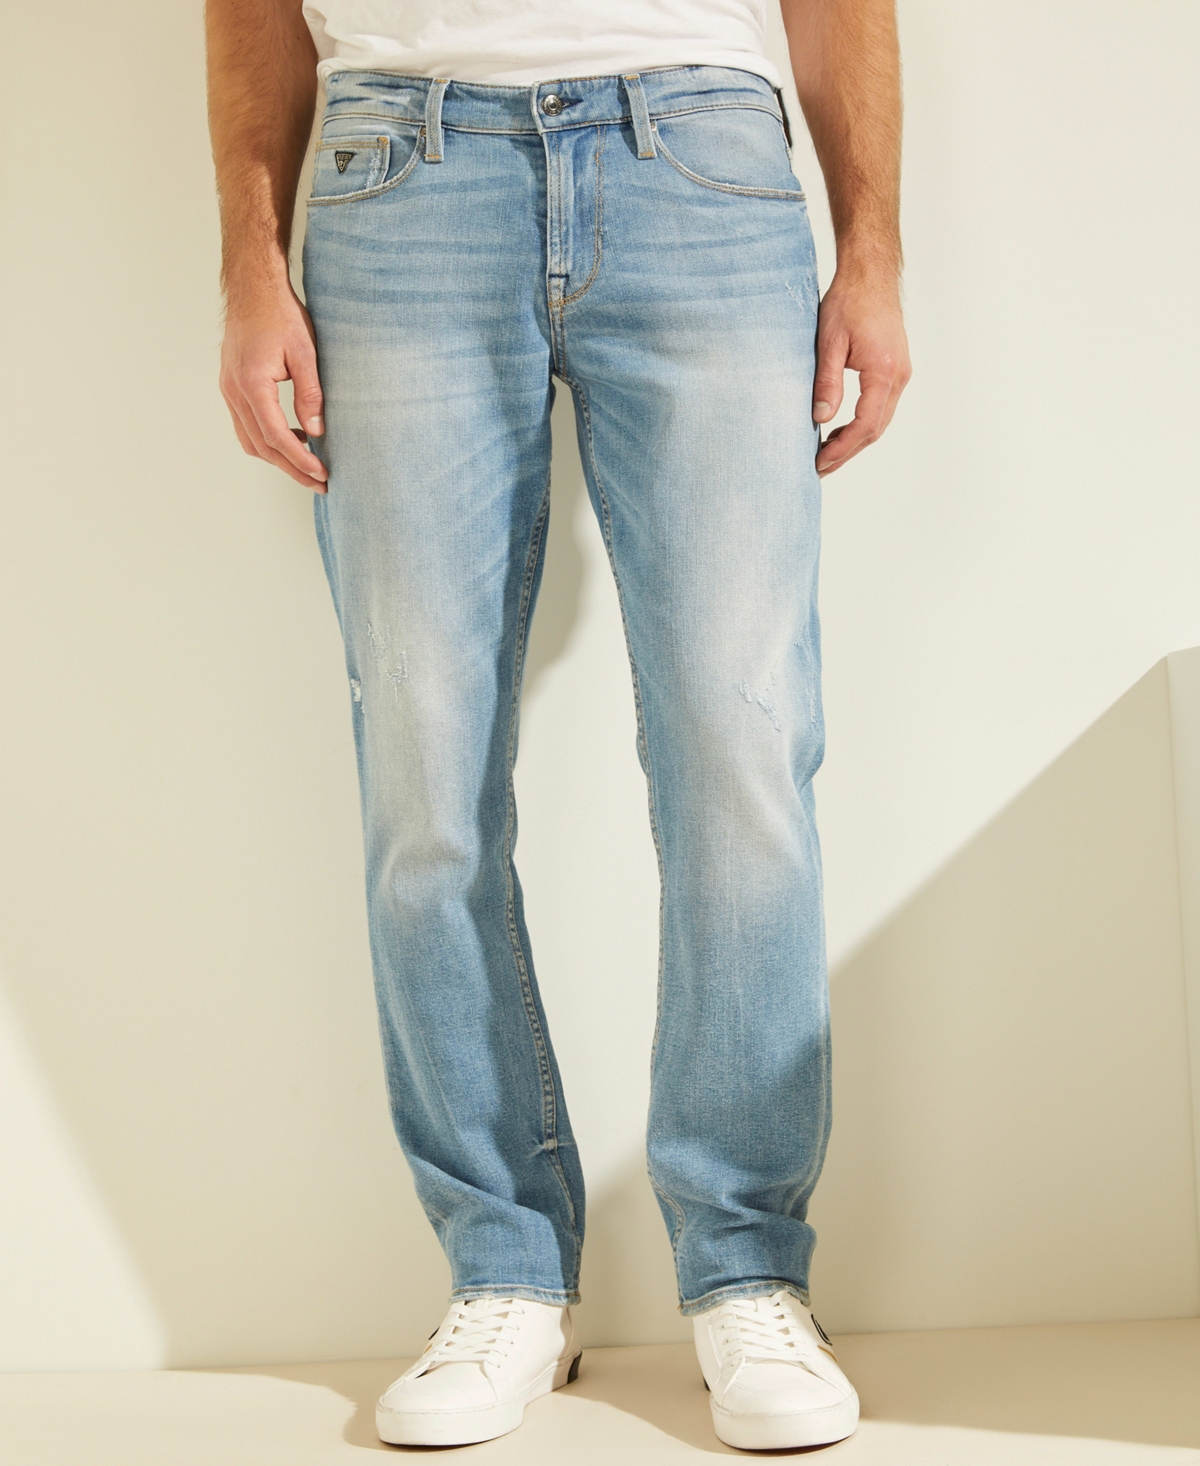 Men's Faded Slim Tapered Jeans - Light Wash